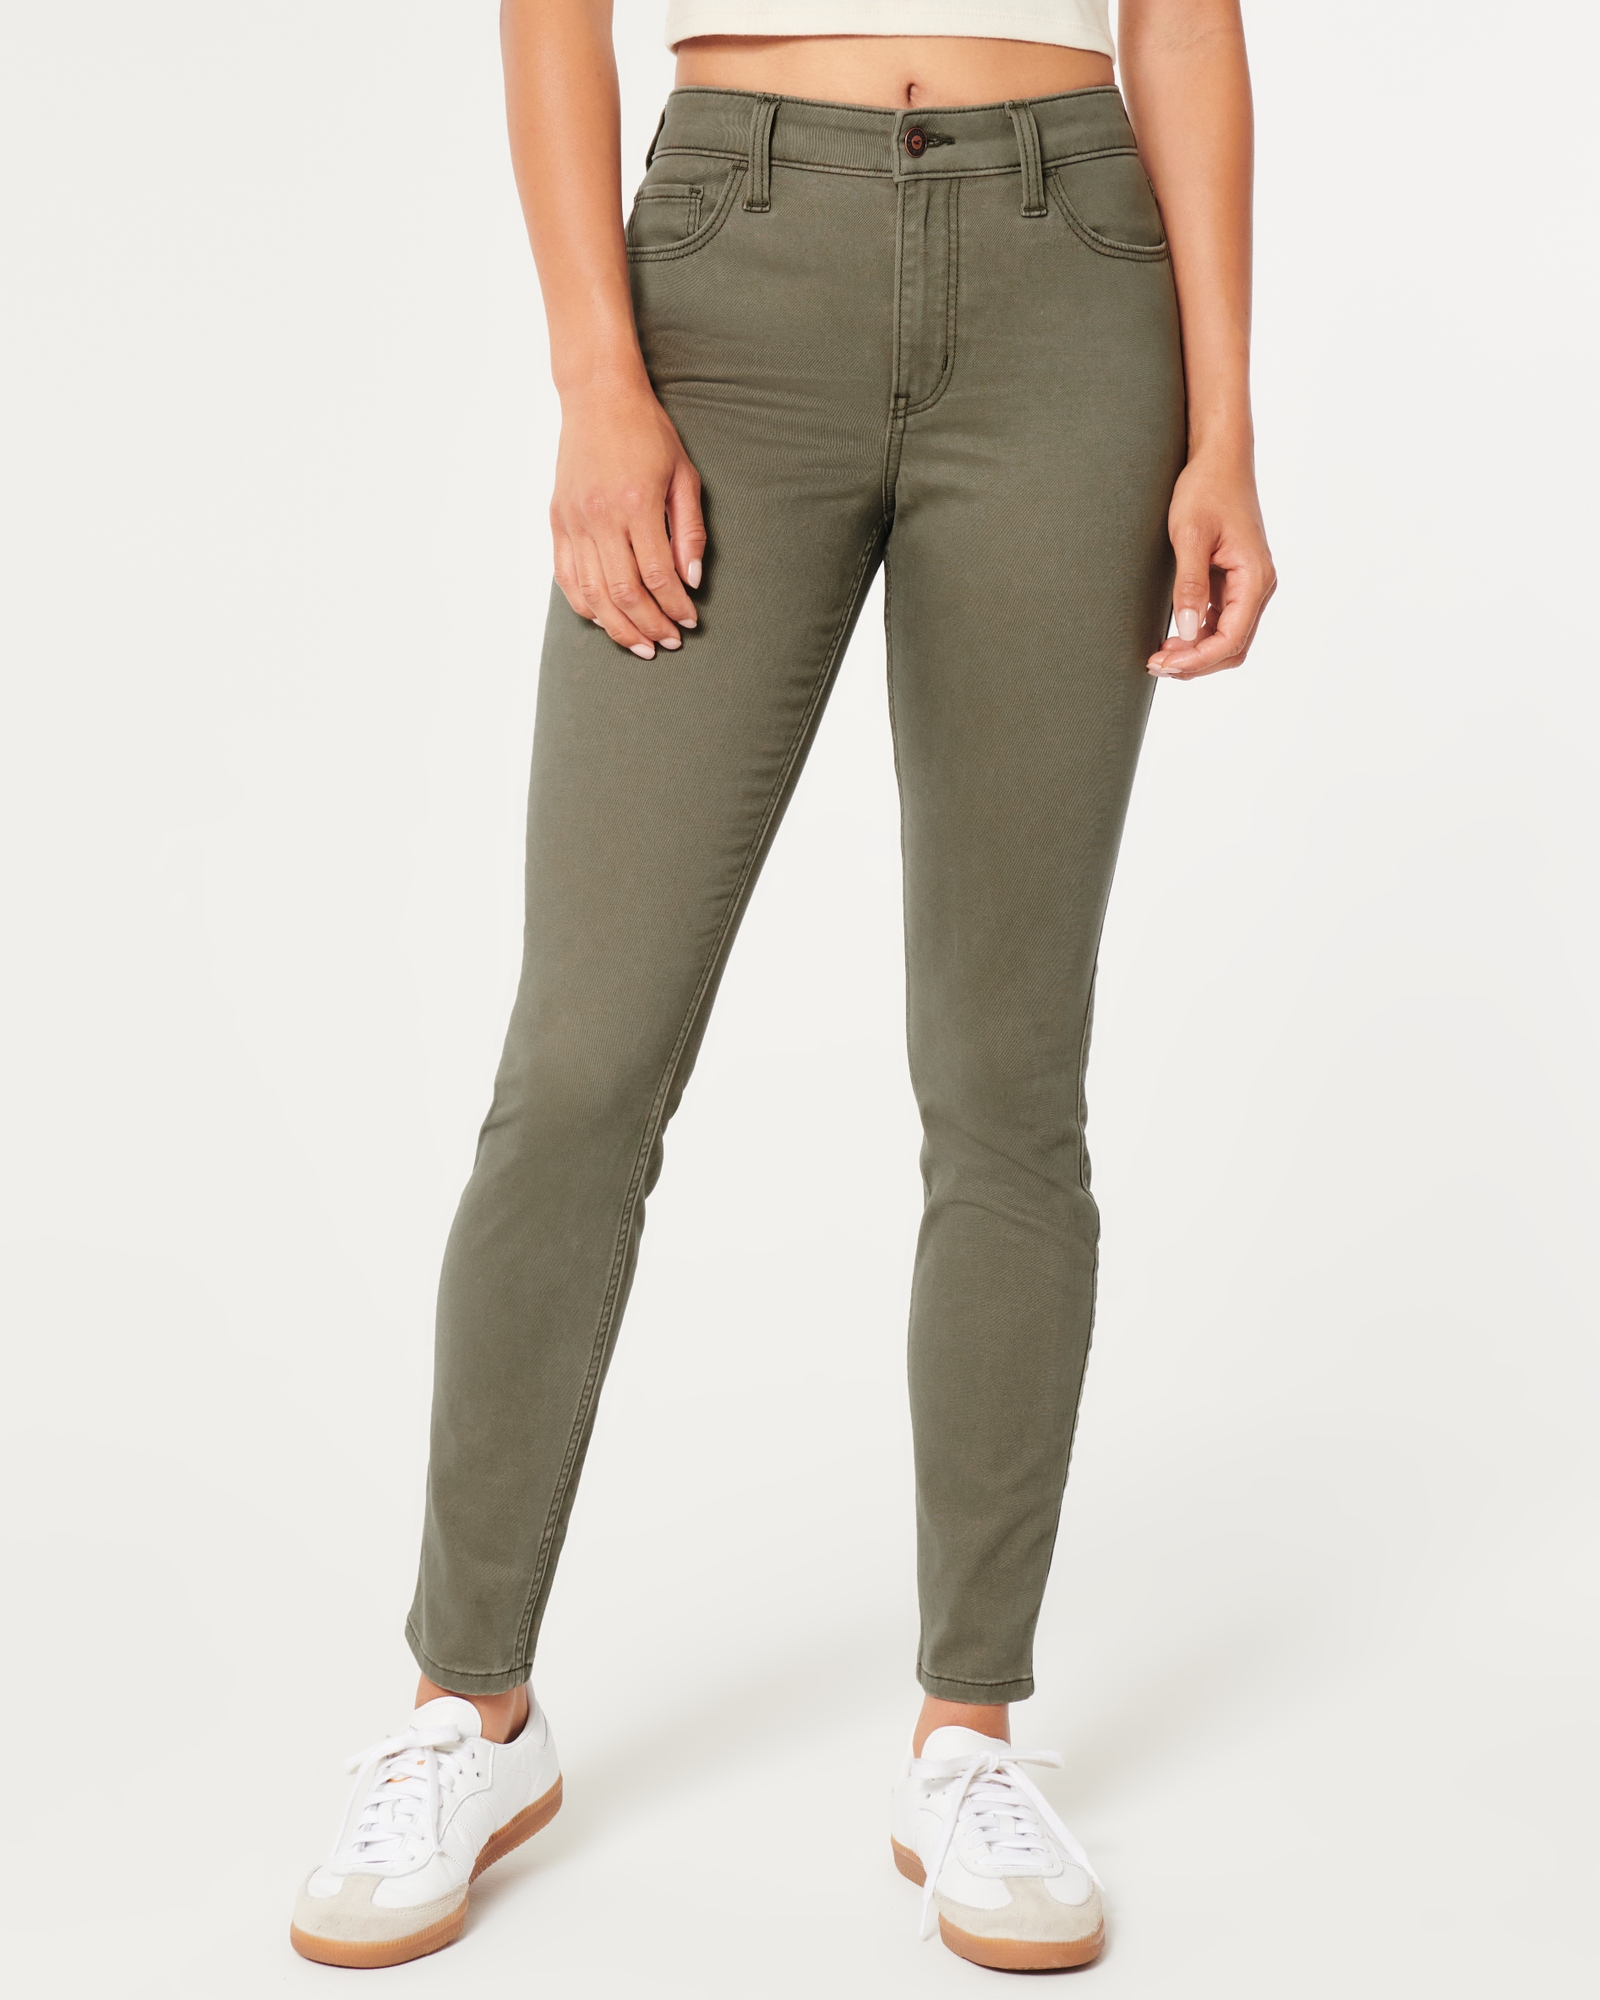 👖 HOLLISTER JEAN CLEARANCE IS 🔥! Women's jeans are as little as $13.99!  😱 Price automatically drops in cart! 🔗 LINK IN BIO…